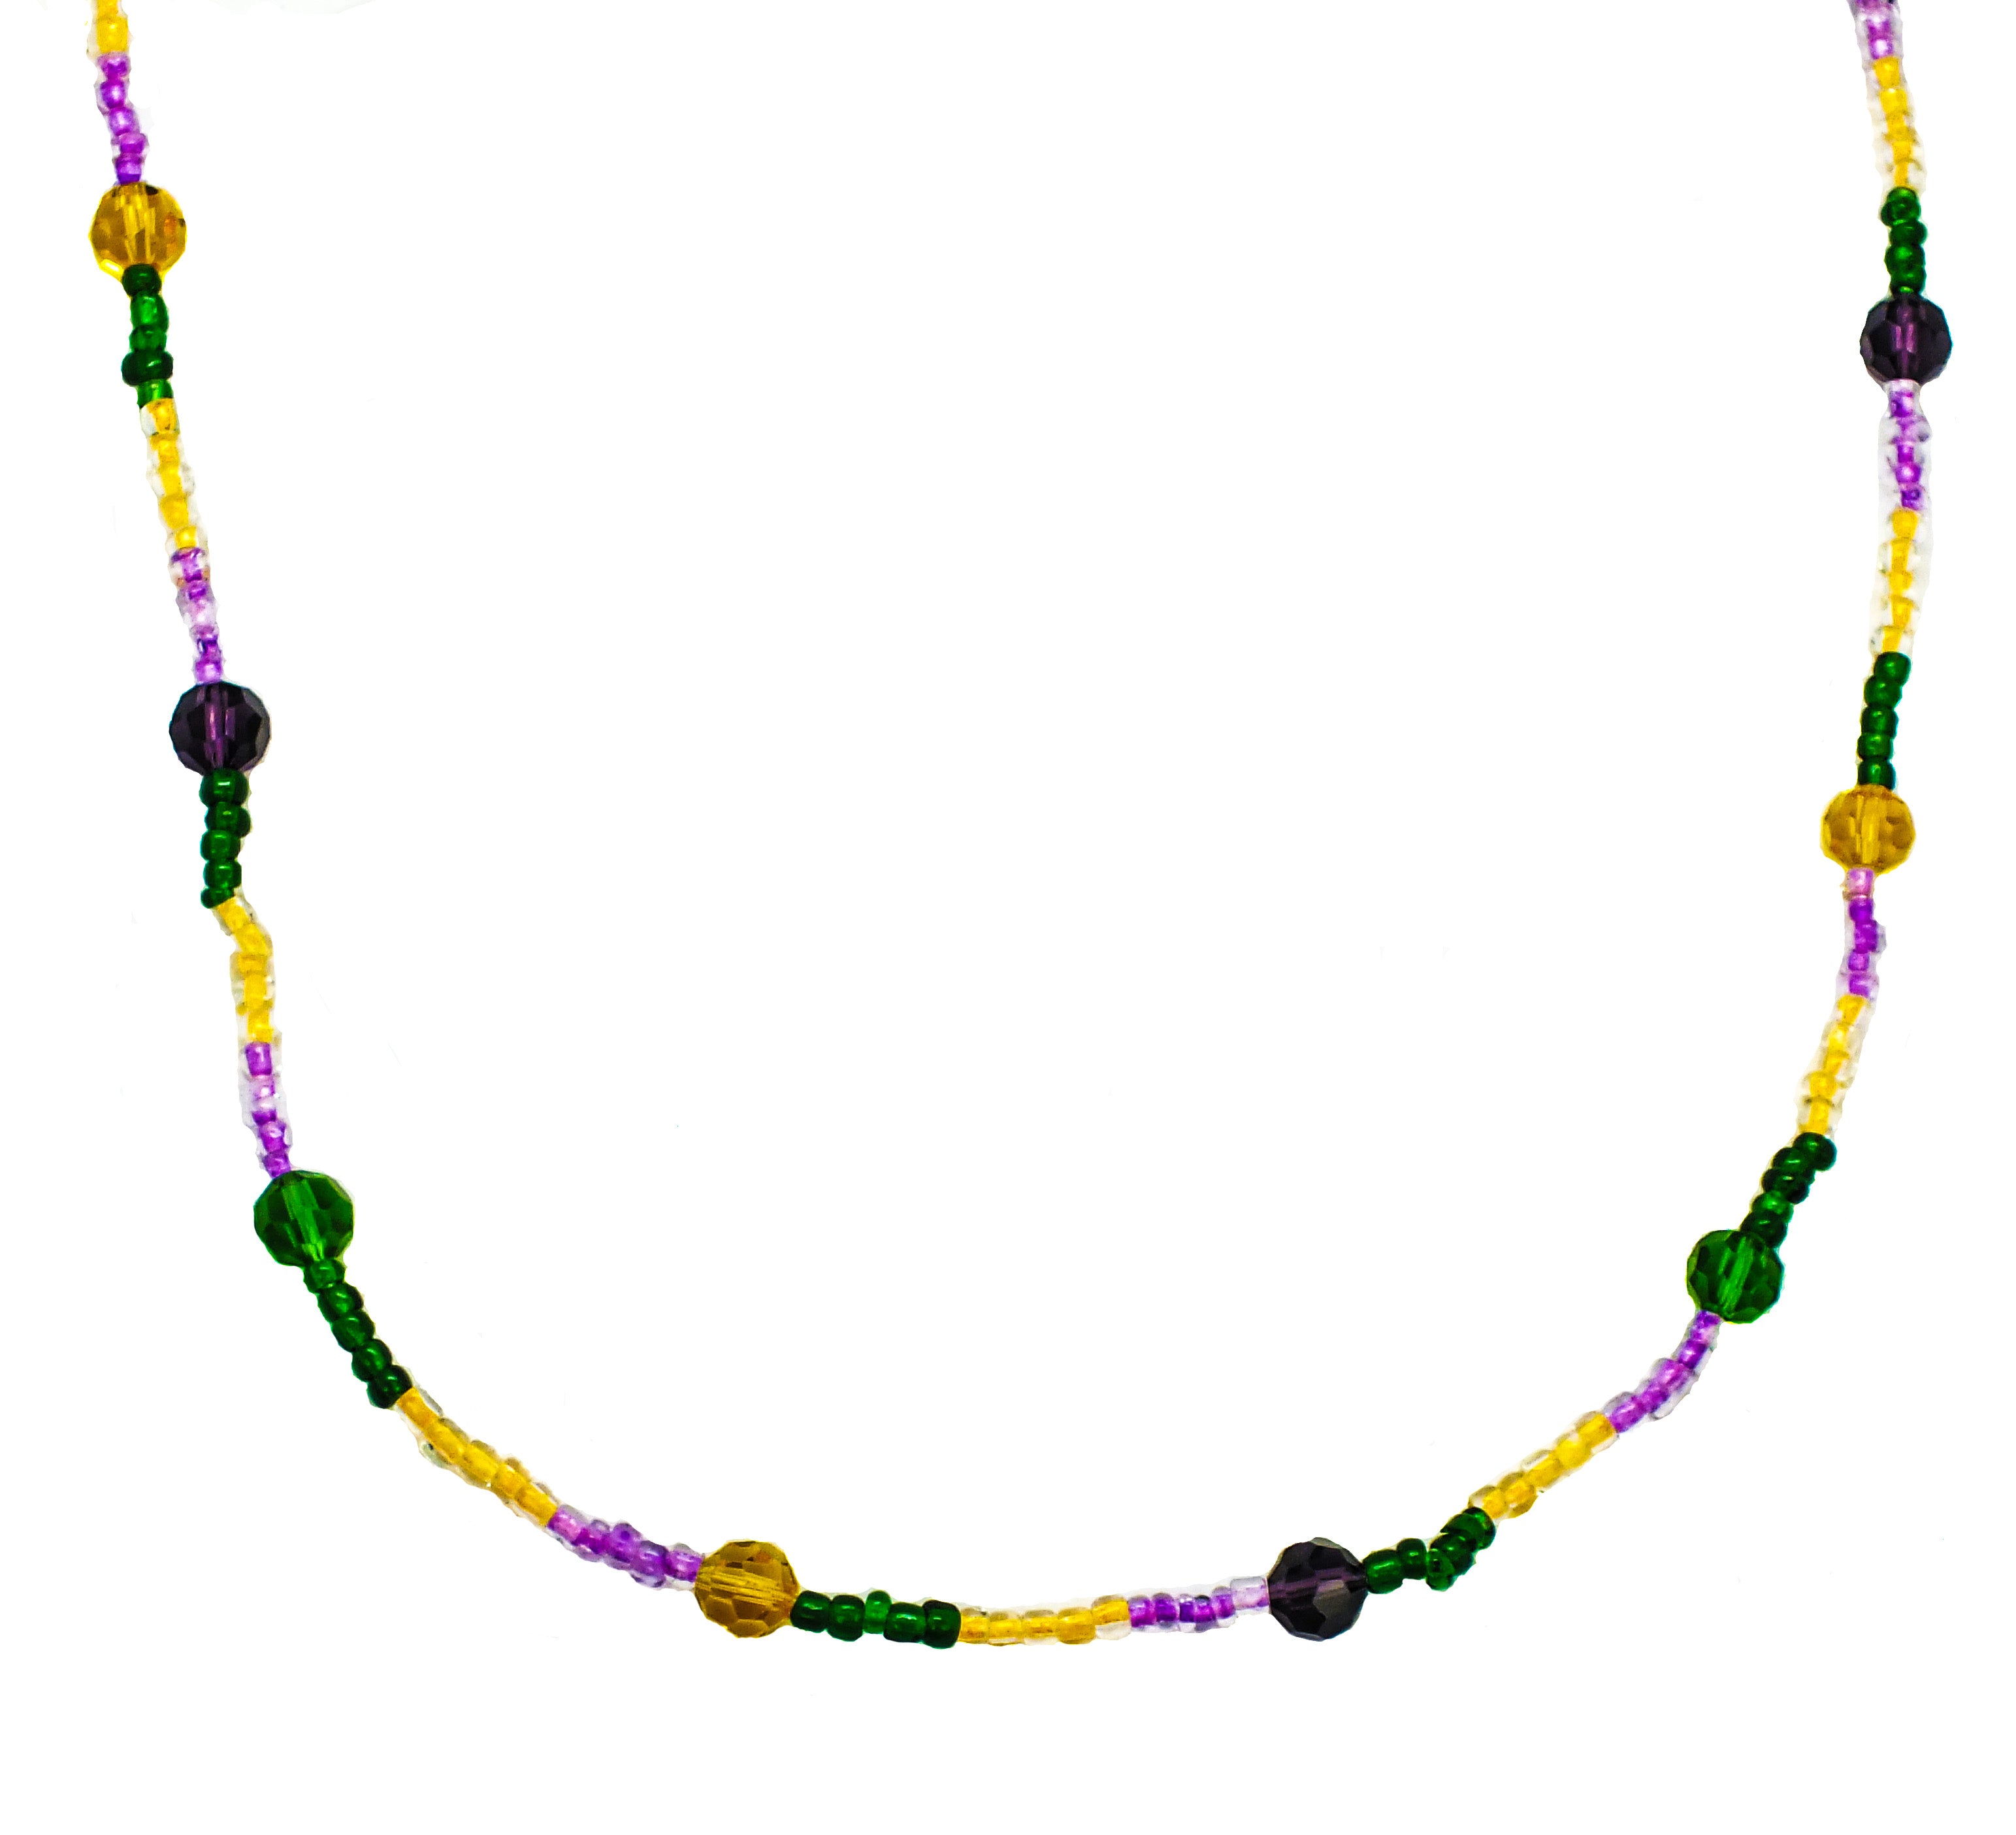 Purple, Green and Gold Mardi Gras Appliques from Beads by the Dozen